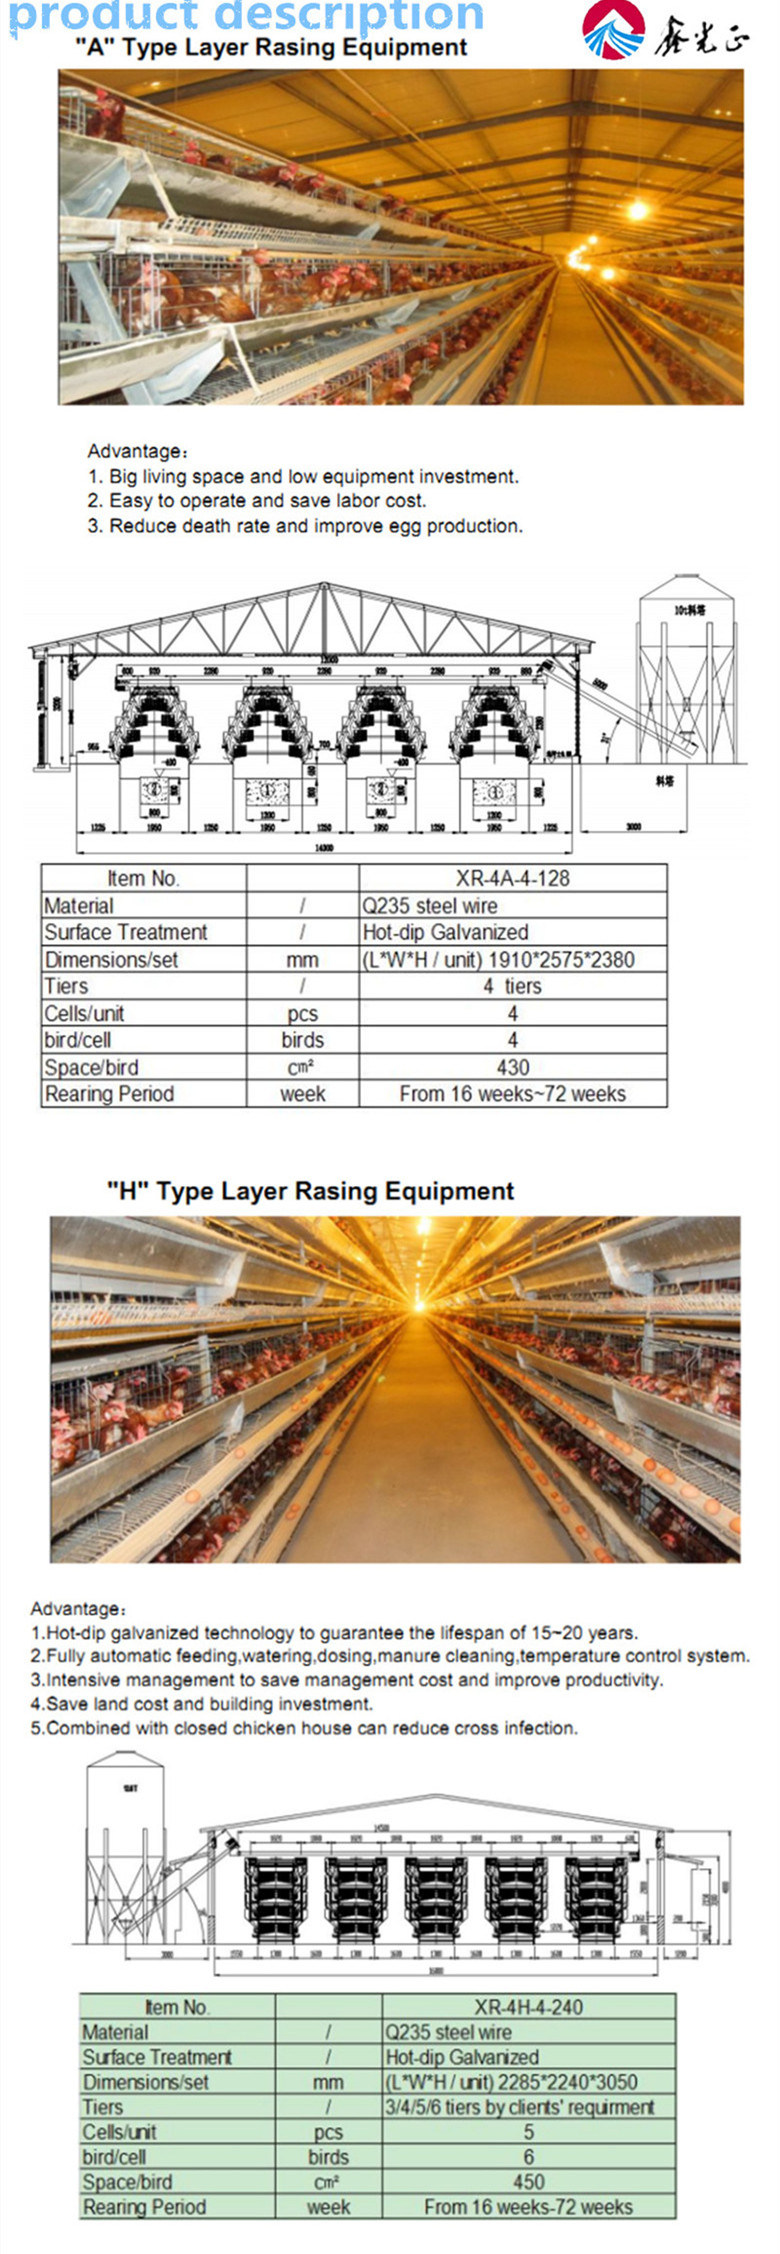 4 Layers of Laying Hens Equipment and Houses